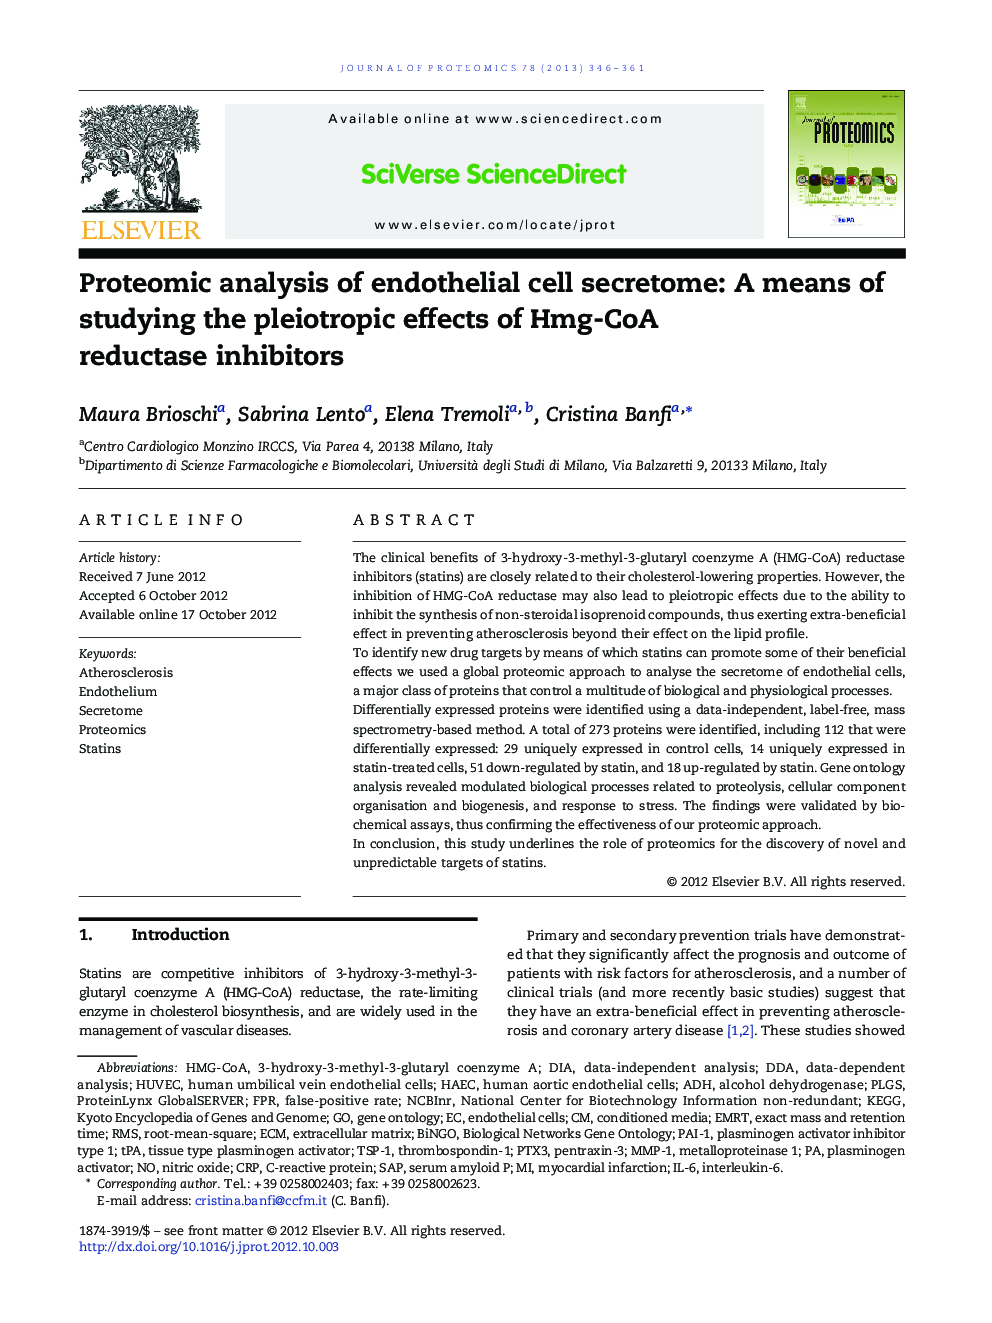 Proteomic analysis of endothelial cell secretome: A means of studying the pleiotropic effects of Hmg-CoA reductase inhibitors